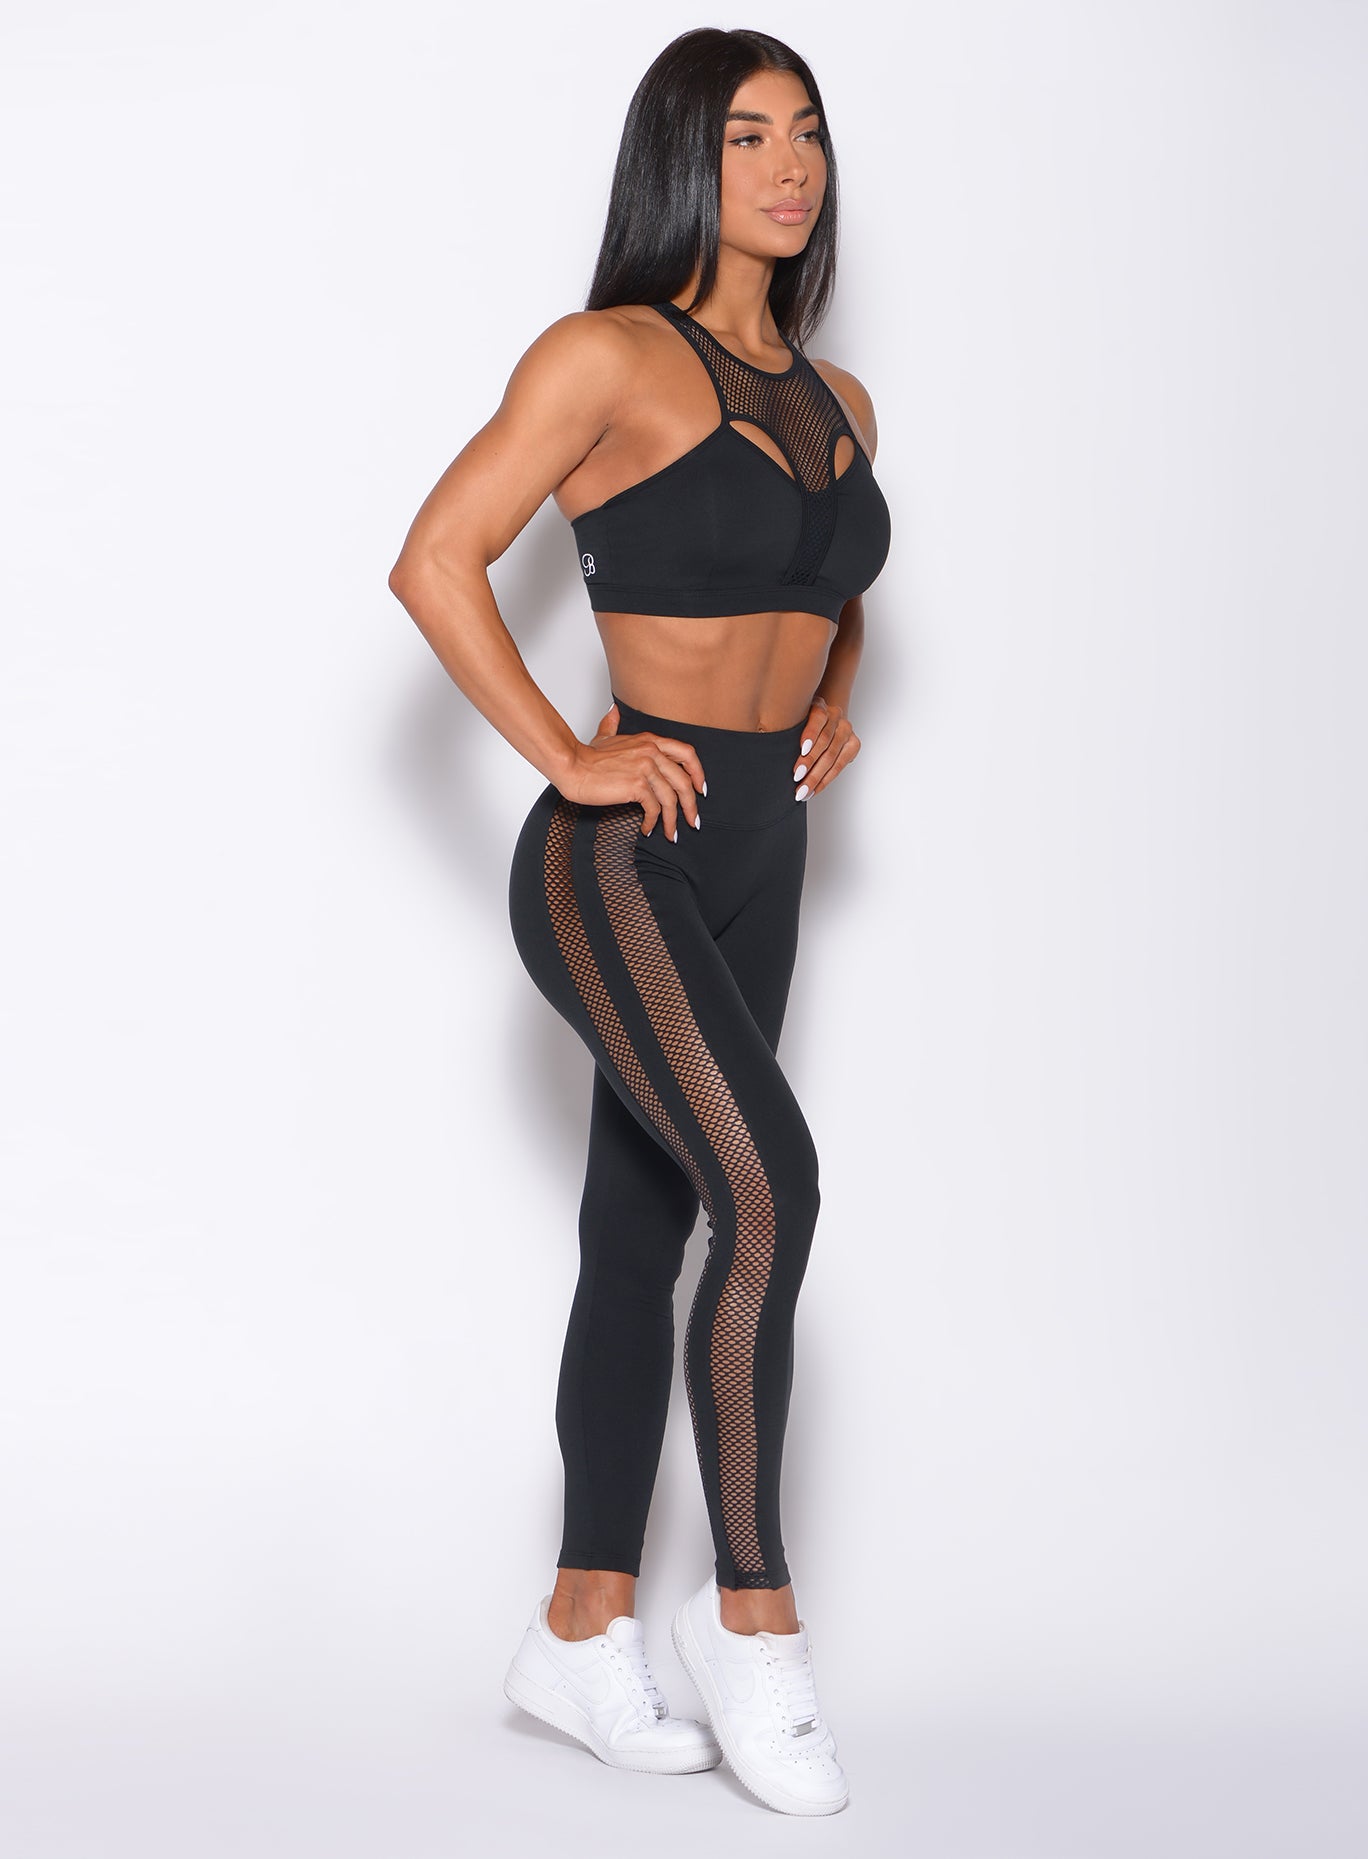 Right side profile view of a model in our black Mohawk leggings and a matching bra